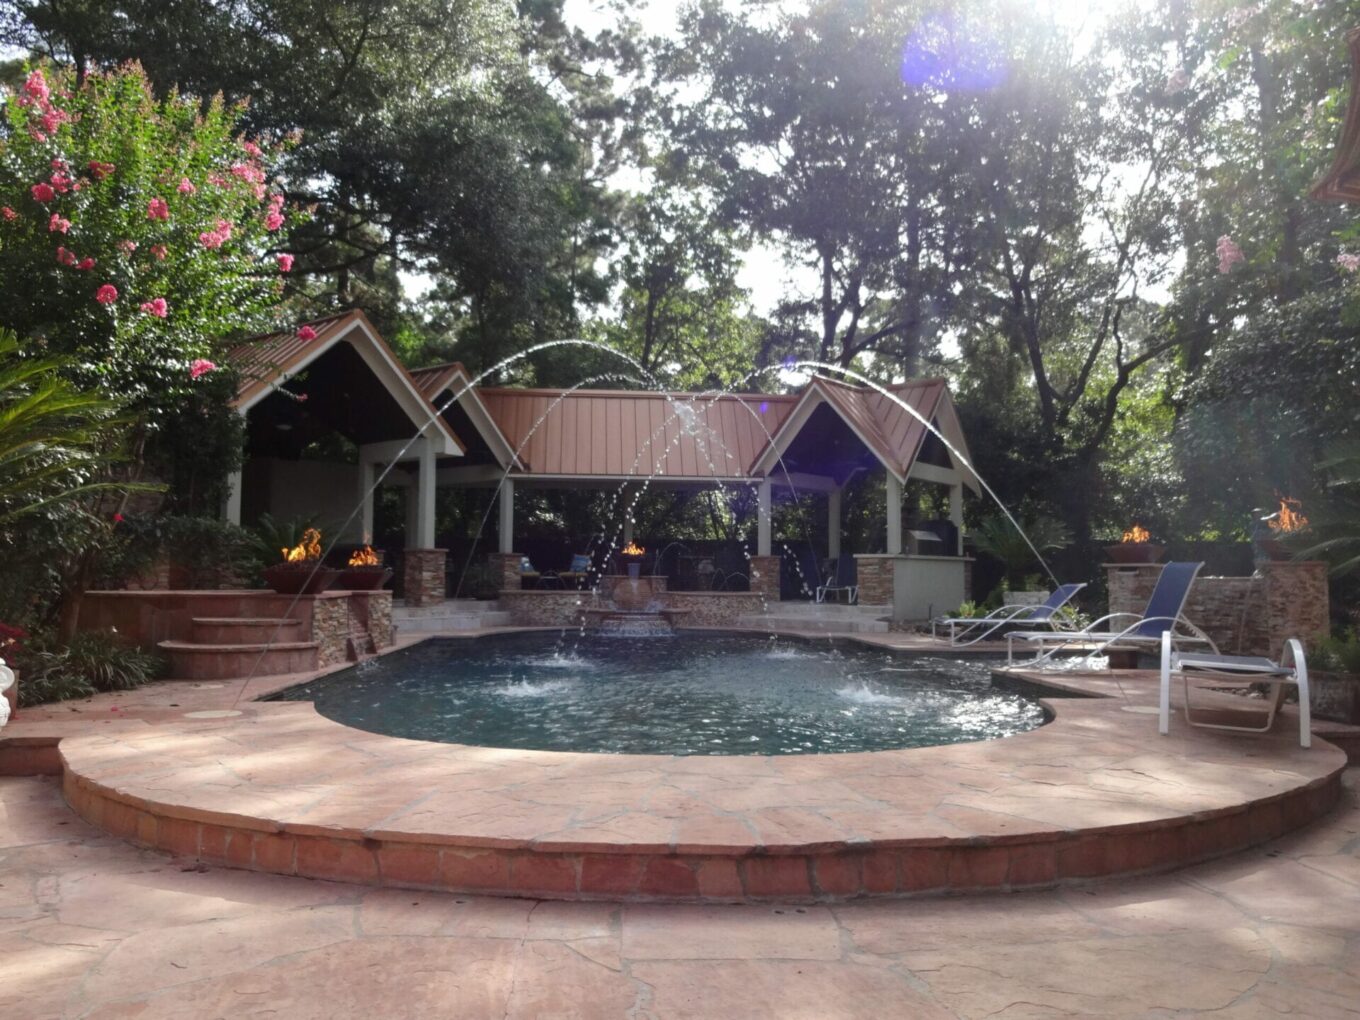 A large pool with water jets and a gazebo.